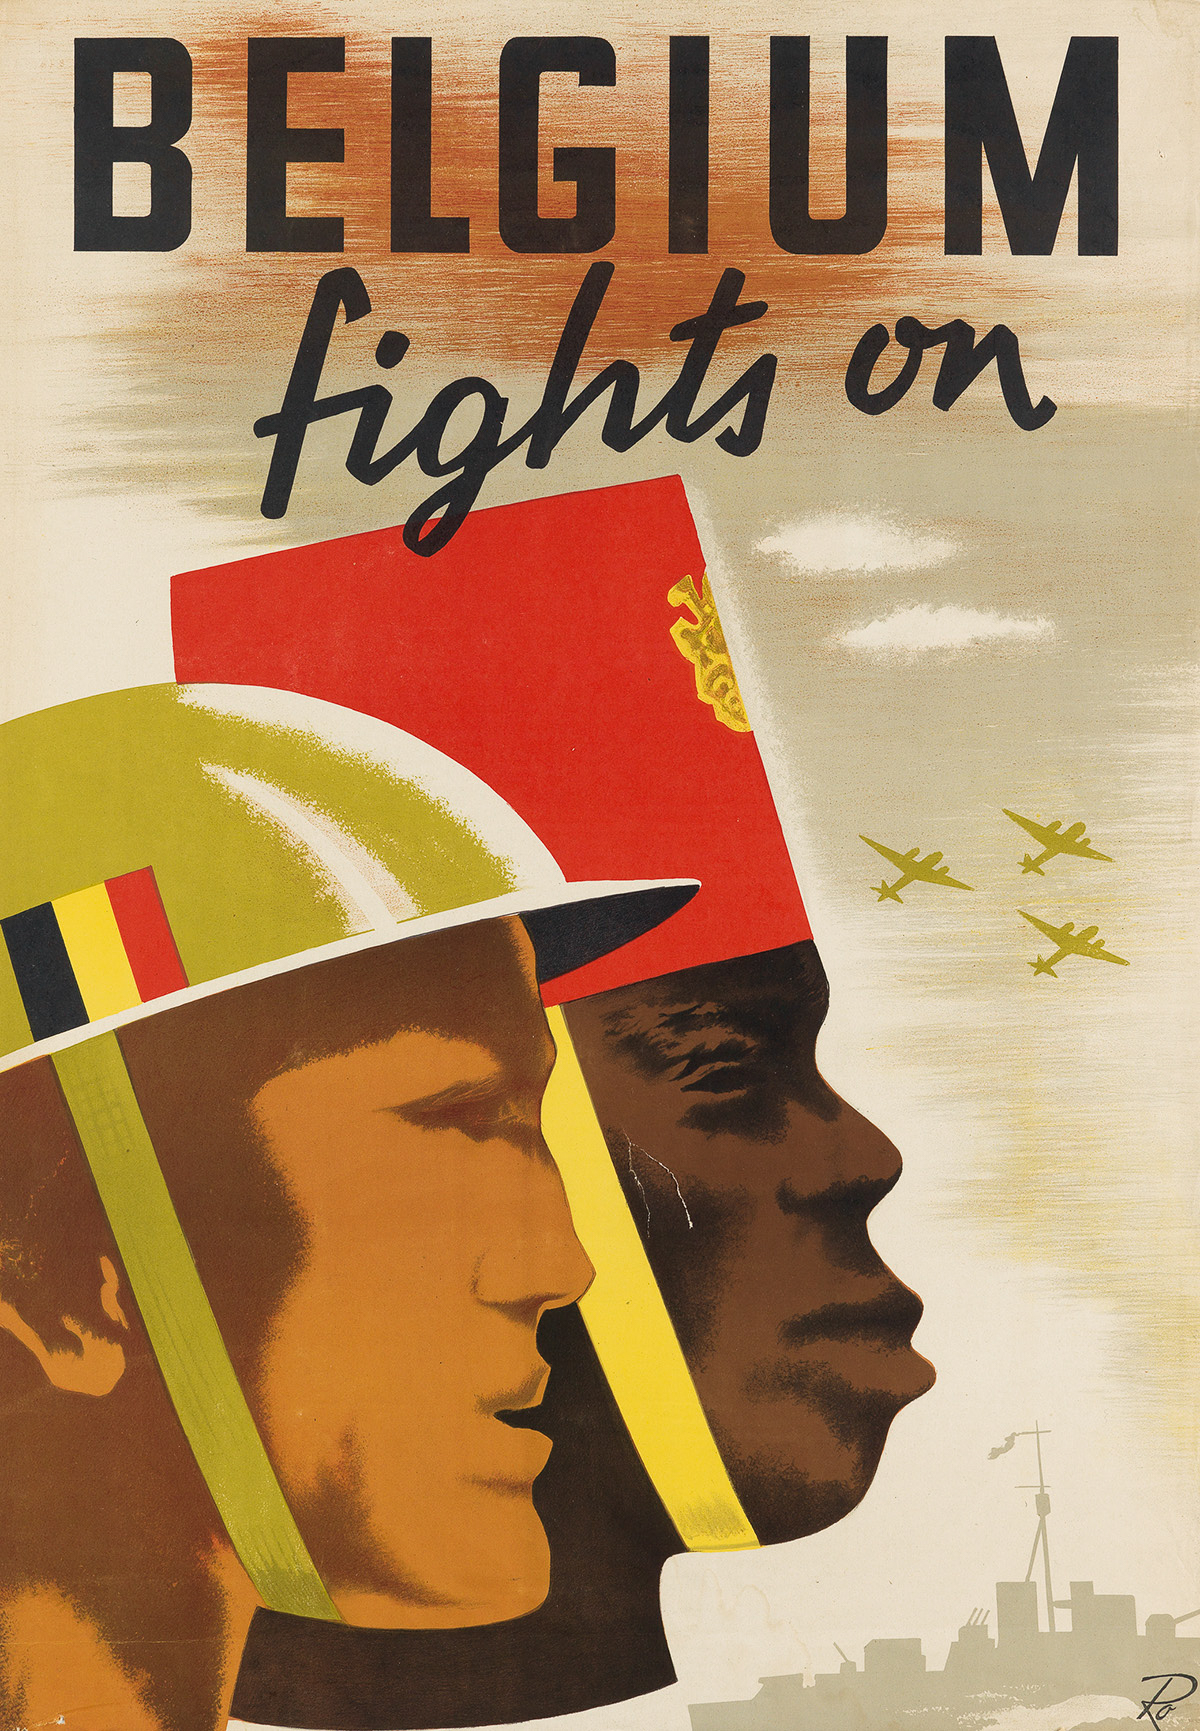 R.O. (DATES UNKNOWN). BELGIUM FIGHTS ON. Circa 1940. 29x20 inches, 75x52 cm.